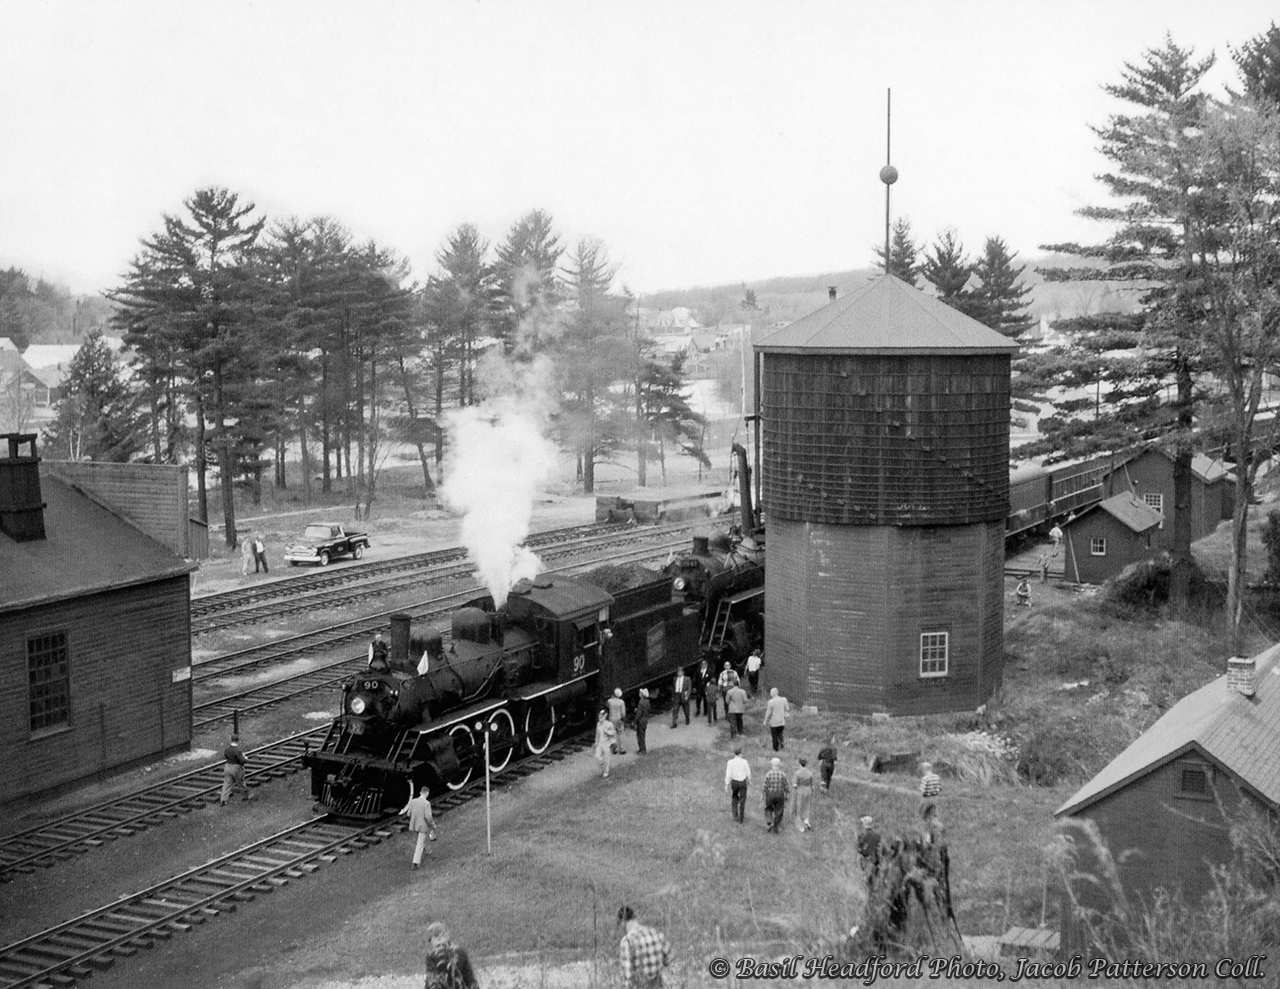 The joint excursion of the Upper Canada Railway Society and Canadian Railroad Historical Association behind E-10-a 2-6-0 90 and N-4-a 2-8-0 2649 is seen pausing briefly at Bancroft before continuing north to wye at York River.  The train had stopped to allow local children to board the train for a ride up to the wye and back, after which the locomotives would take on coal and water. Departing Belleville amid the light rain that morning at 0645h - with a crew from the National Film Board setup in the baggage car - the excursion ran along the Campbellford Subdivision to Anson Junction, taking the east leg of the wye onto the Maynooth Subdivision. Seen here, the train would pause briefly at Bancroft before proceeding three miles north to York River where the train could be wyed for the return trip. Arriving back at Anson Junction, the excursion would continue south into Trenton, turning on the wye before returning north to Trenton Junction to rejoin the Oshawa Sub mainline for the short twelve mile run back to Belleville. The special reached a top speed of 55mph on the high iron, running barely 30 minutes ahead of Toronto - Montreal train 6, due into Belleville at 1815h.Notes of the trip per John Freyseng's extensive article in the June 1959 UCRS newsletter. Neither of these locomotives would last another year, with 90 meeting the torch in February 1960, and 2649 that March.Basil Headford Photo, Jacob Patterson Collection.